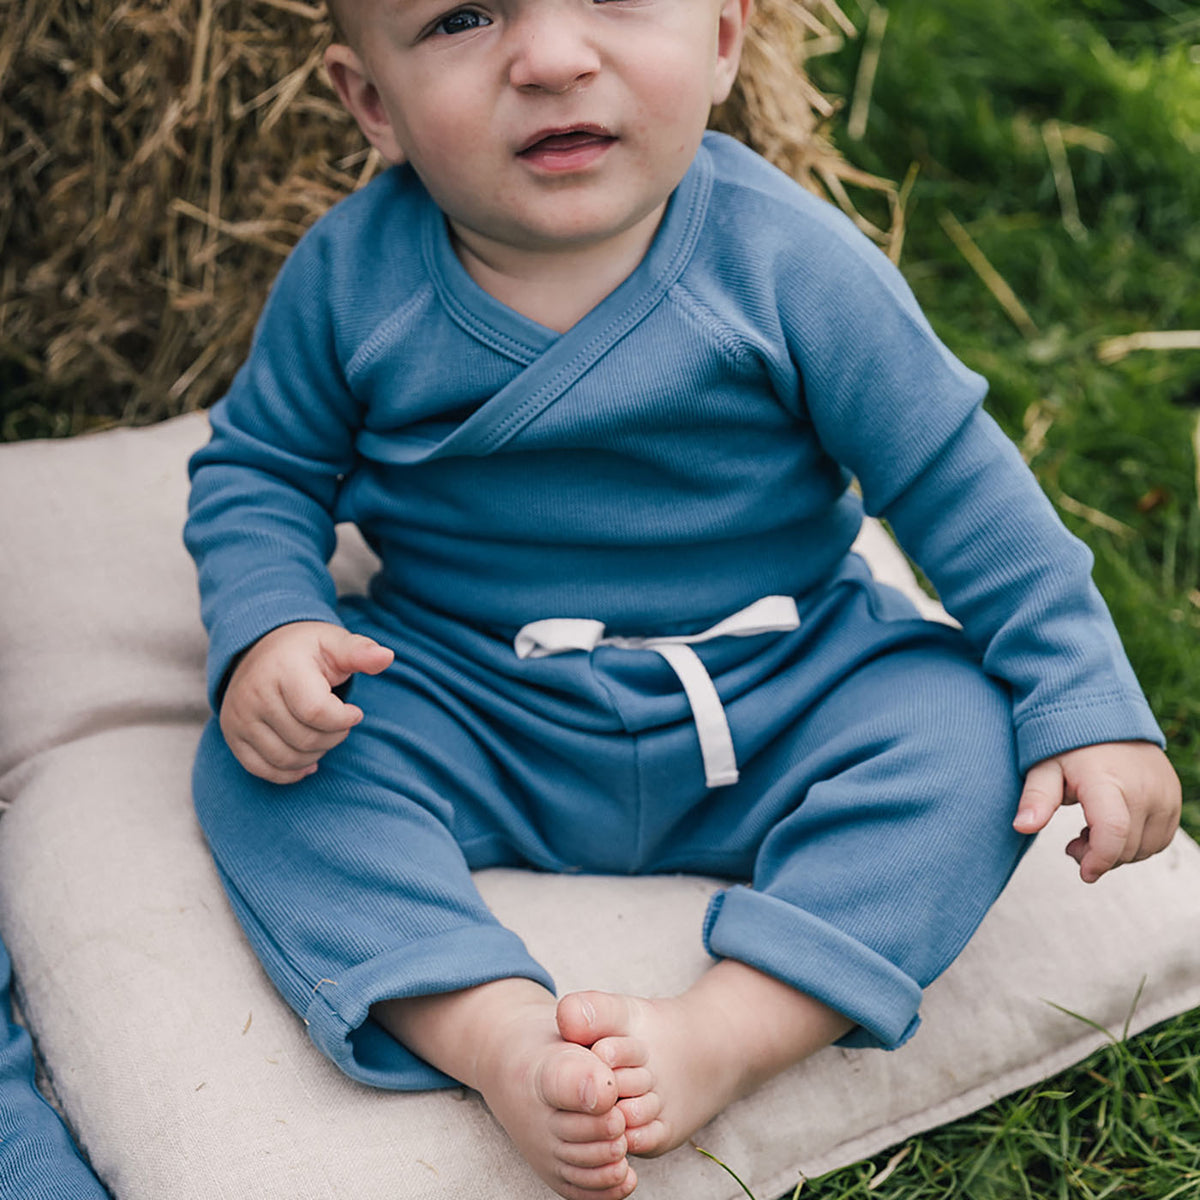 baby sitting on pillow on grass wearing uaua kimono onesie and joggers in azul color